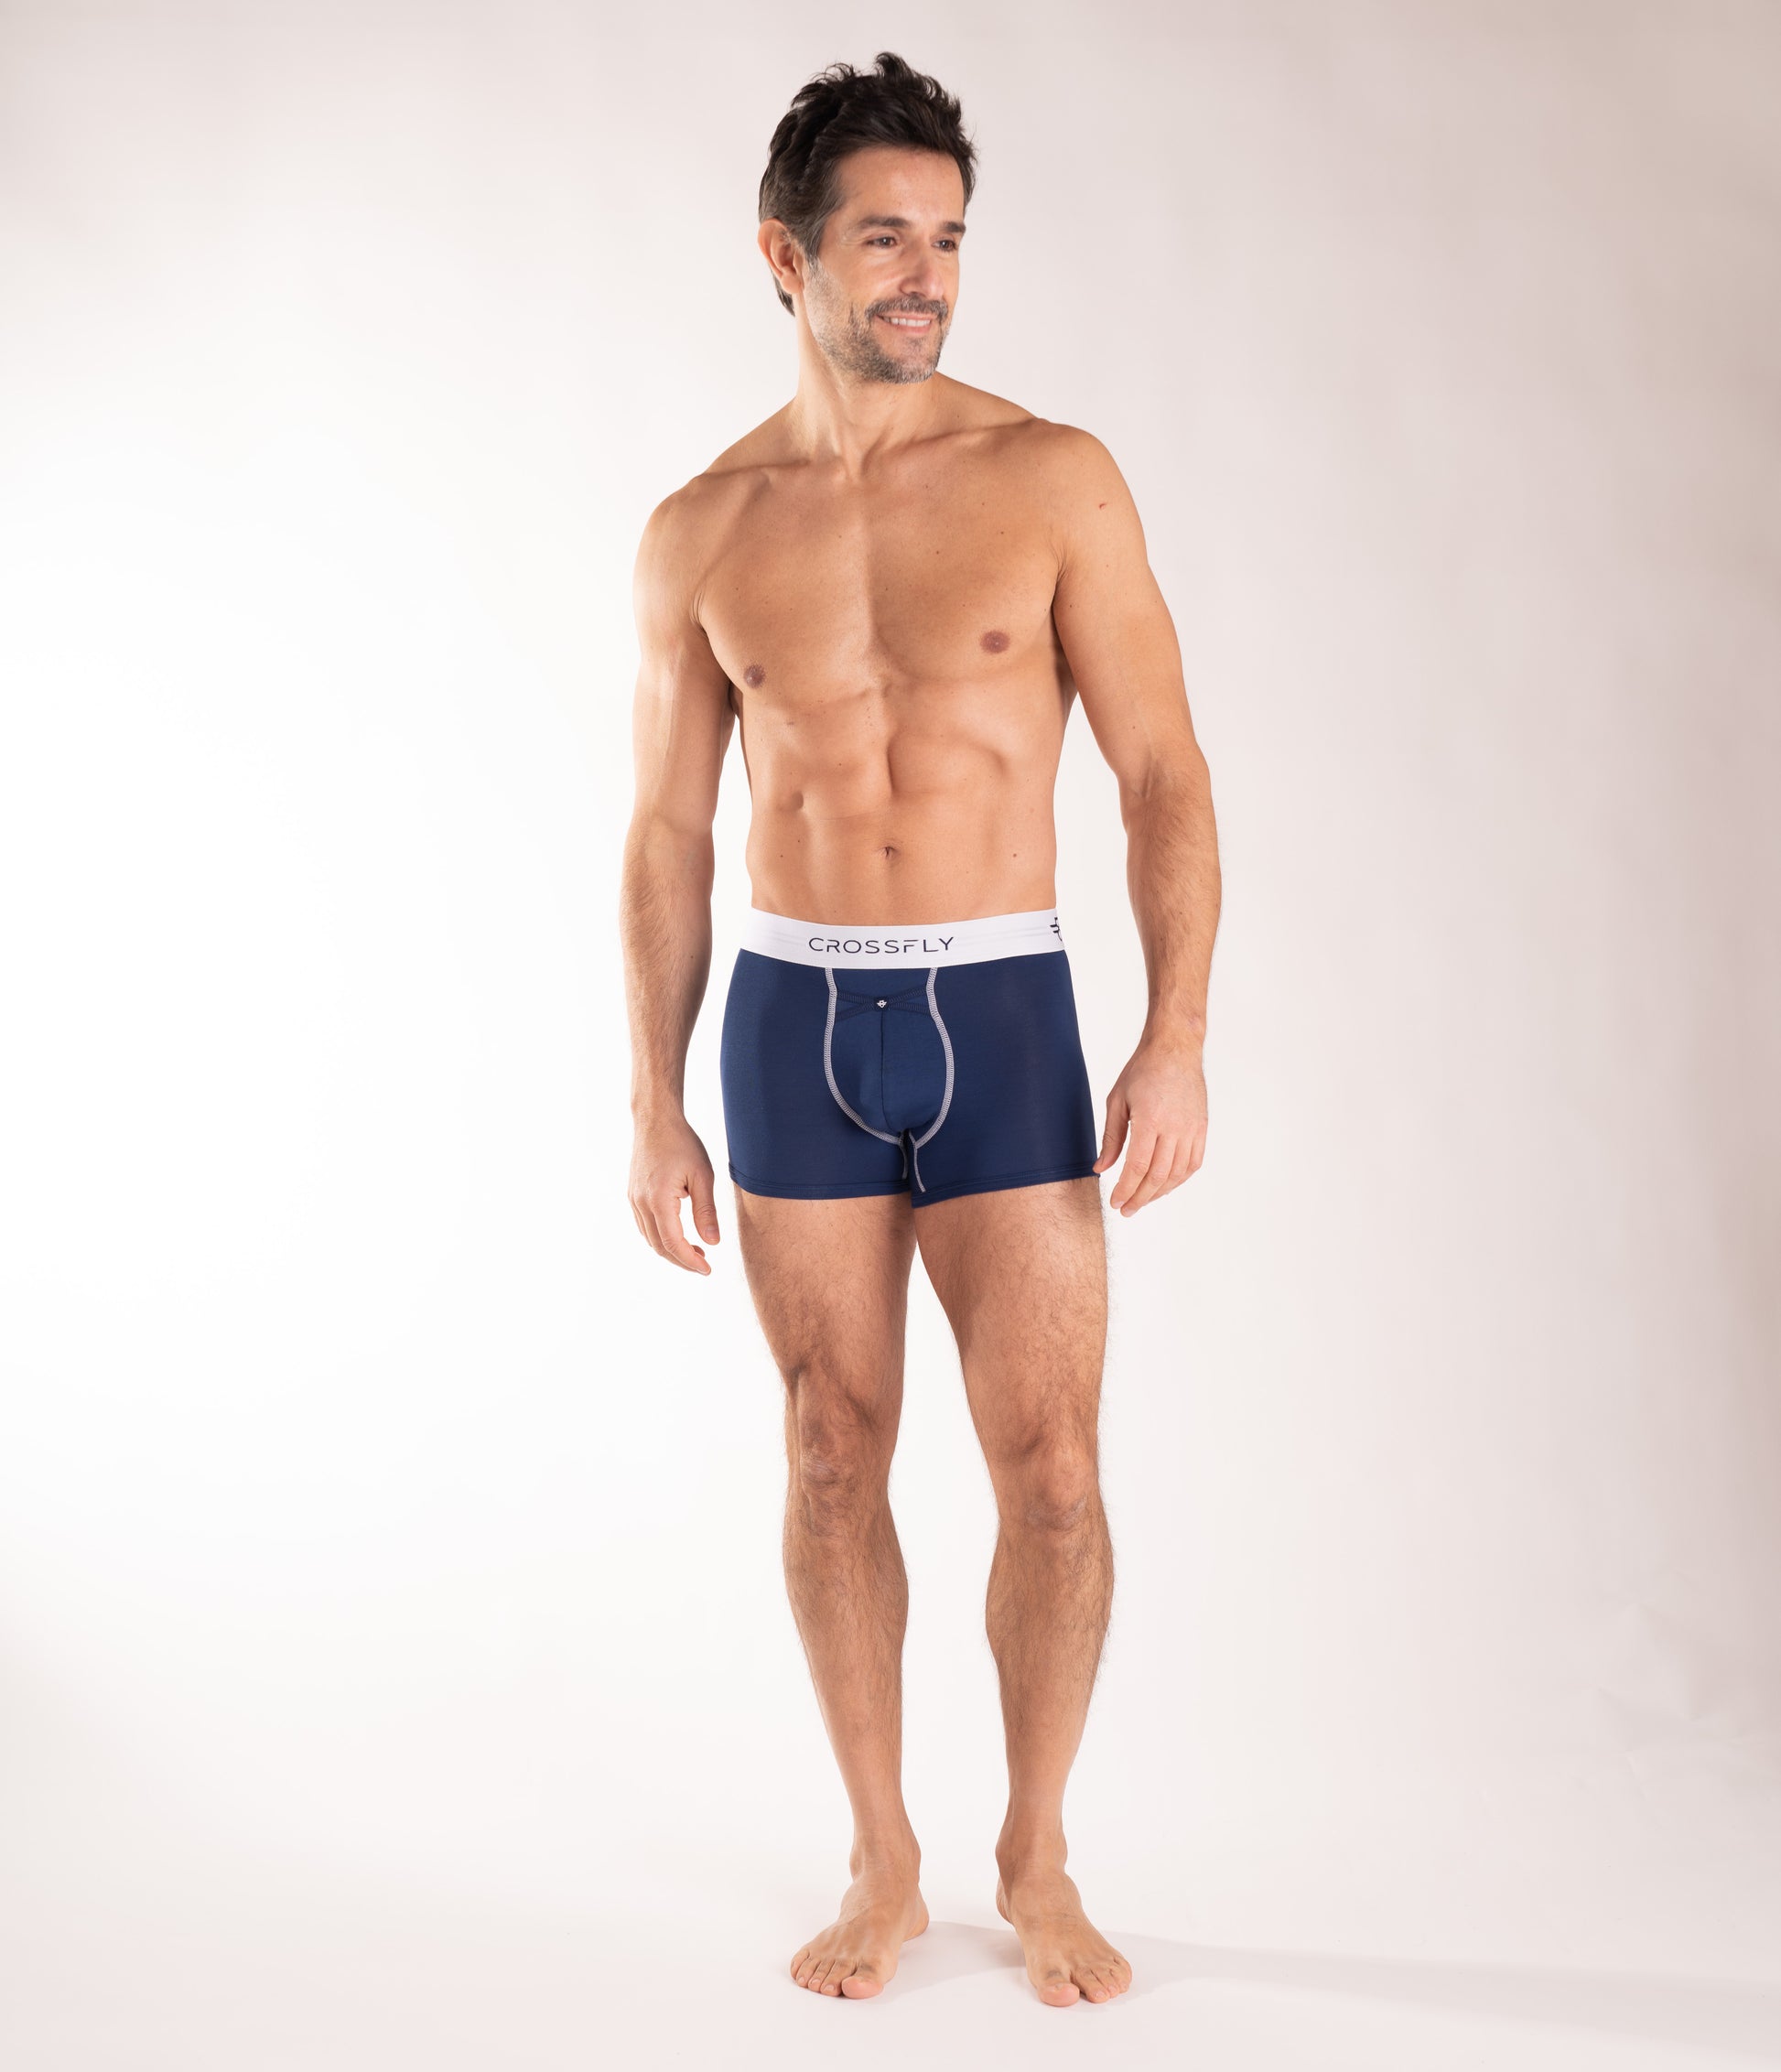 Crossfly men's IKON X 3" navy / white trunks from the Everyday series, featuring X-Fly and Coccoon internal pocket support.